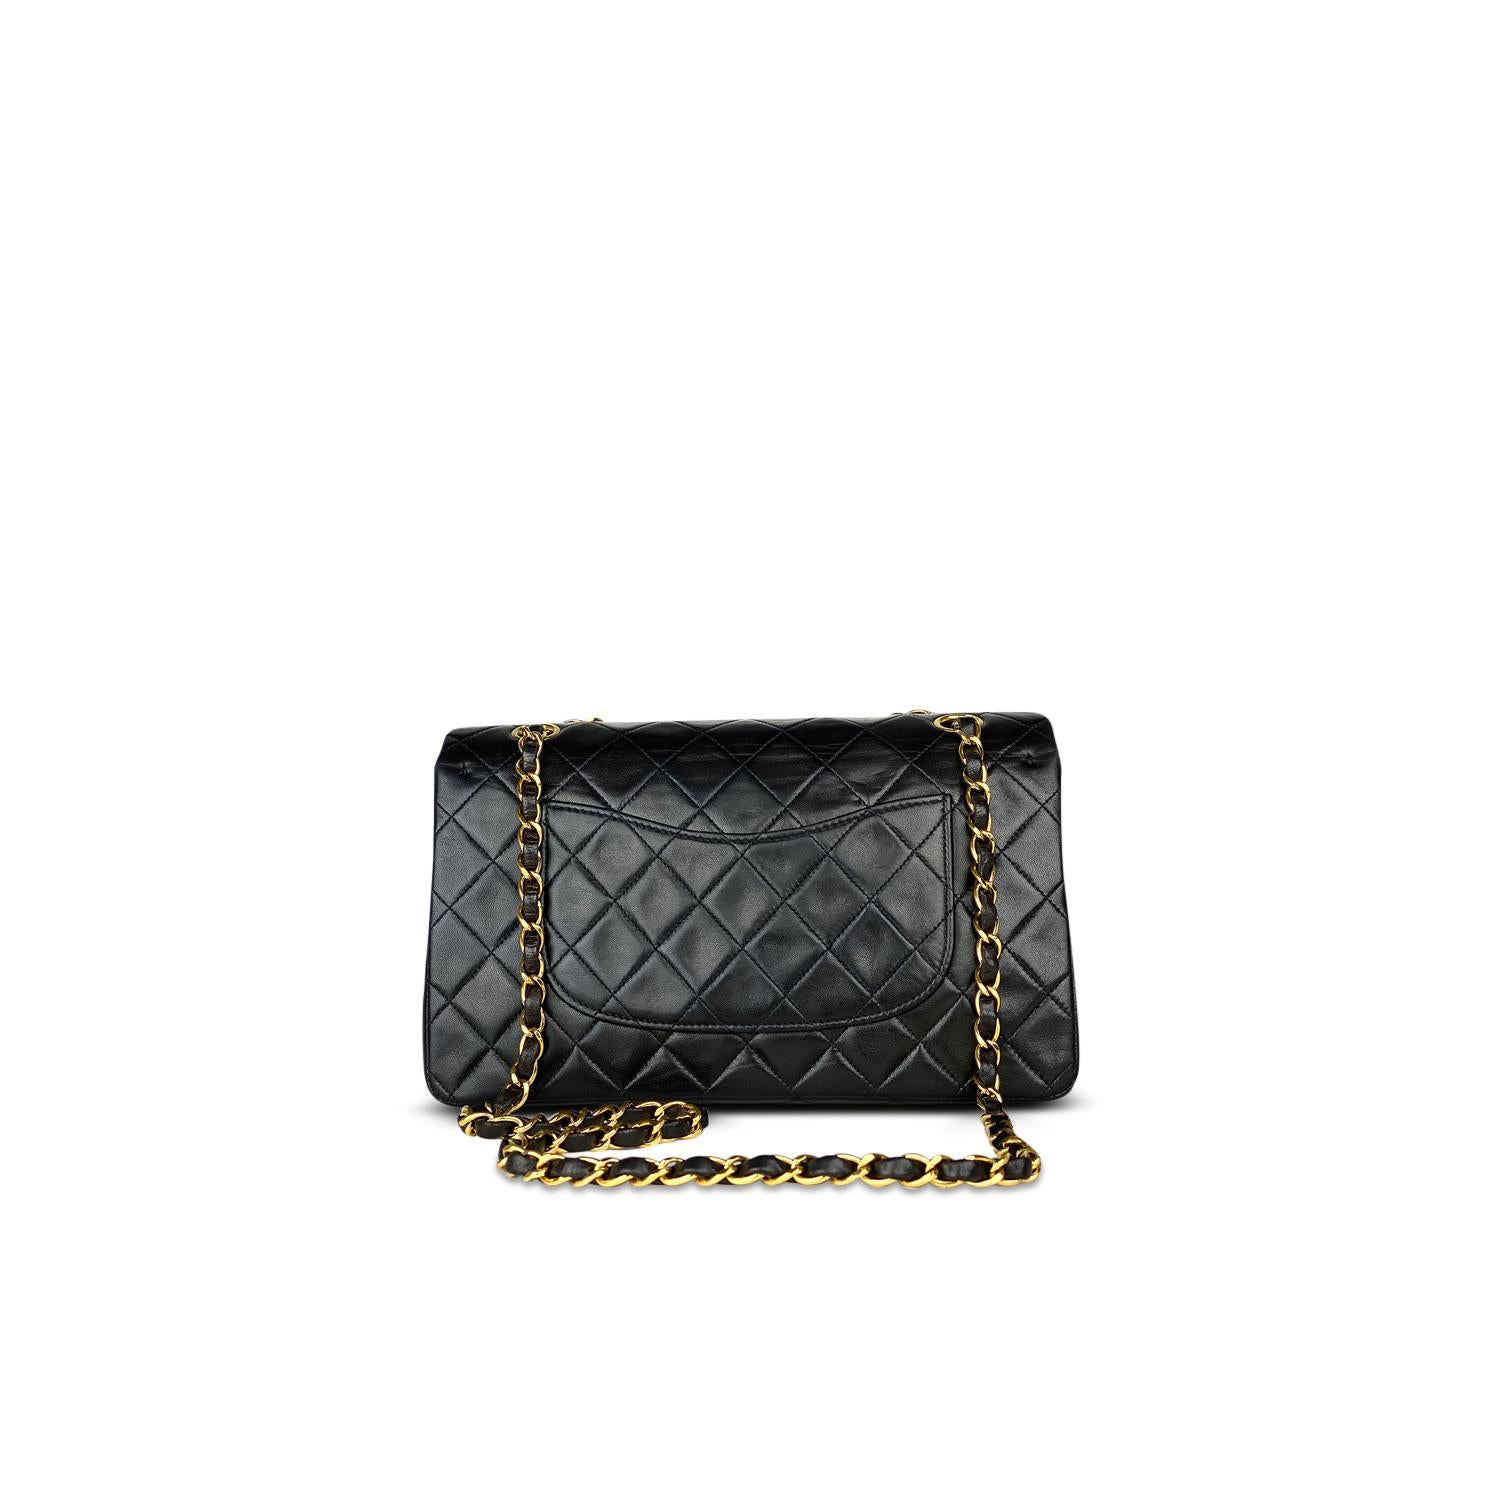 Chanel Black Medium Classic/Timeless Double Flap Bag In Good Condition For Sale In Sundbyberg, SE